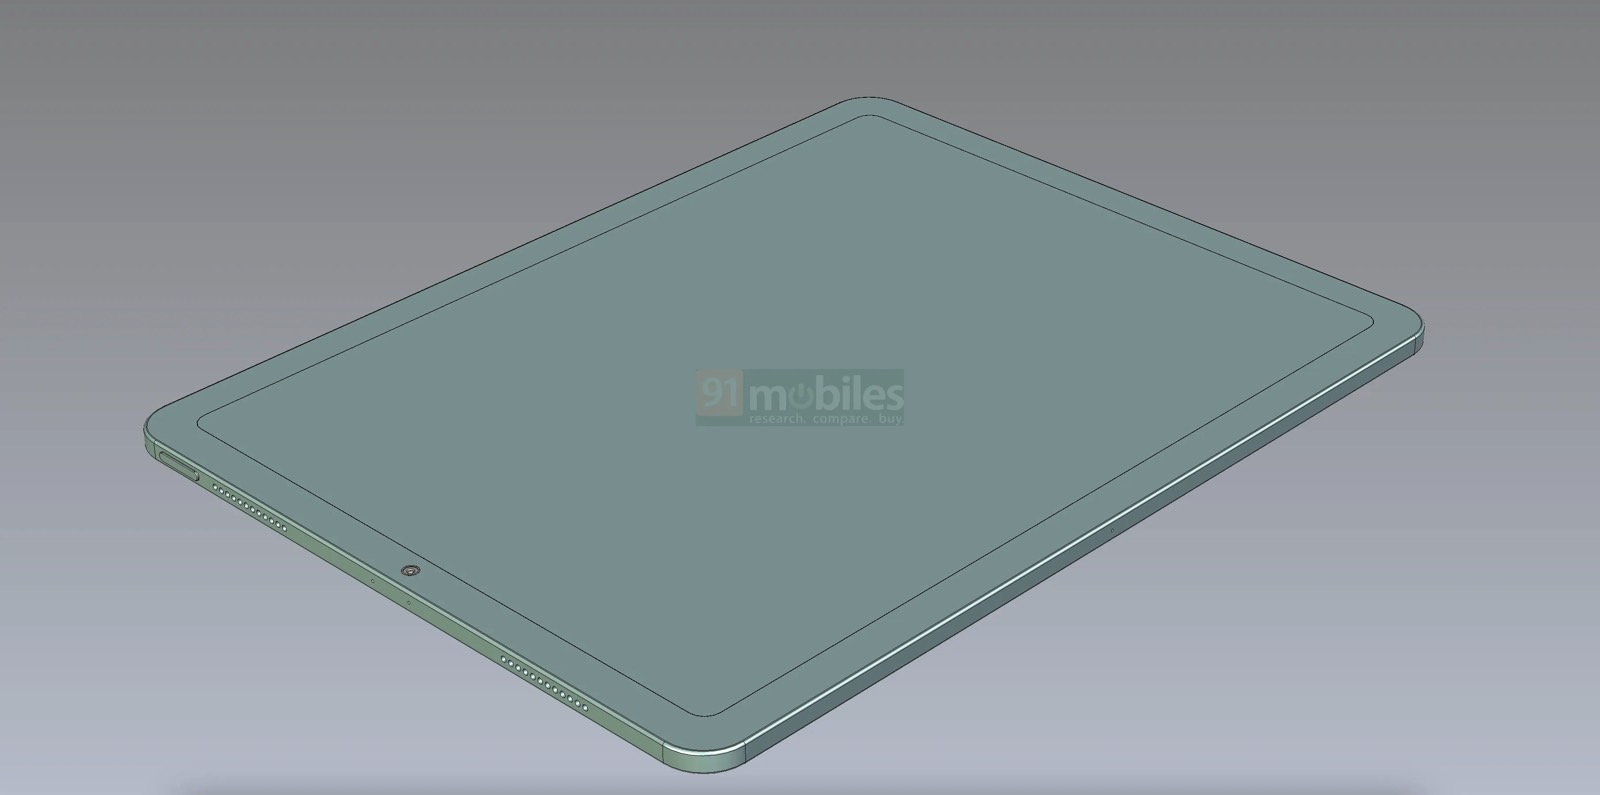 CAD designs showing the purported 12.9-inch iPad Air 6.